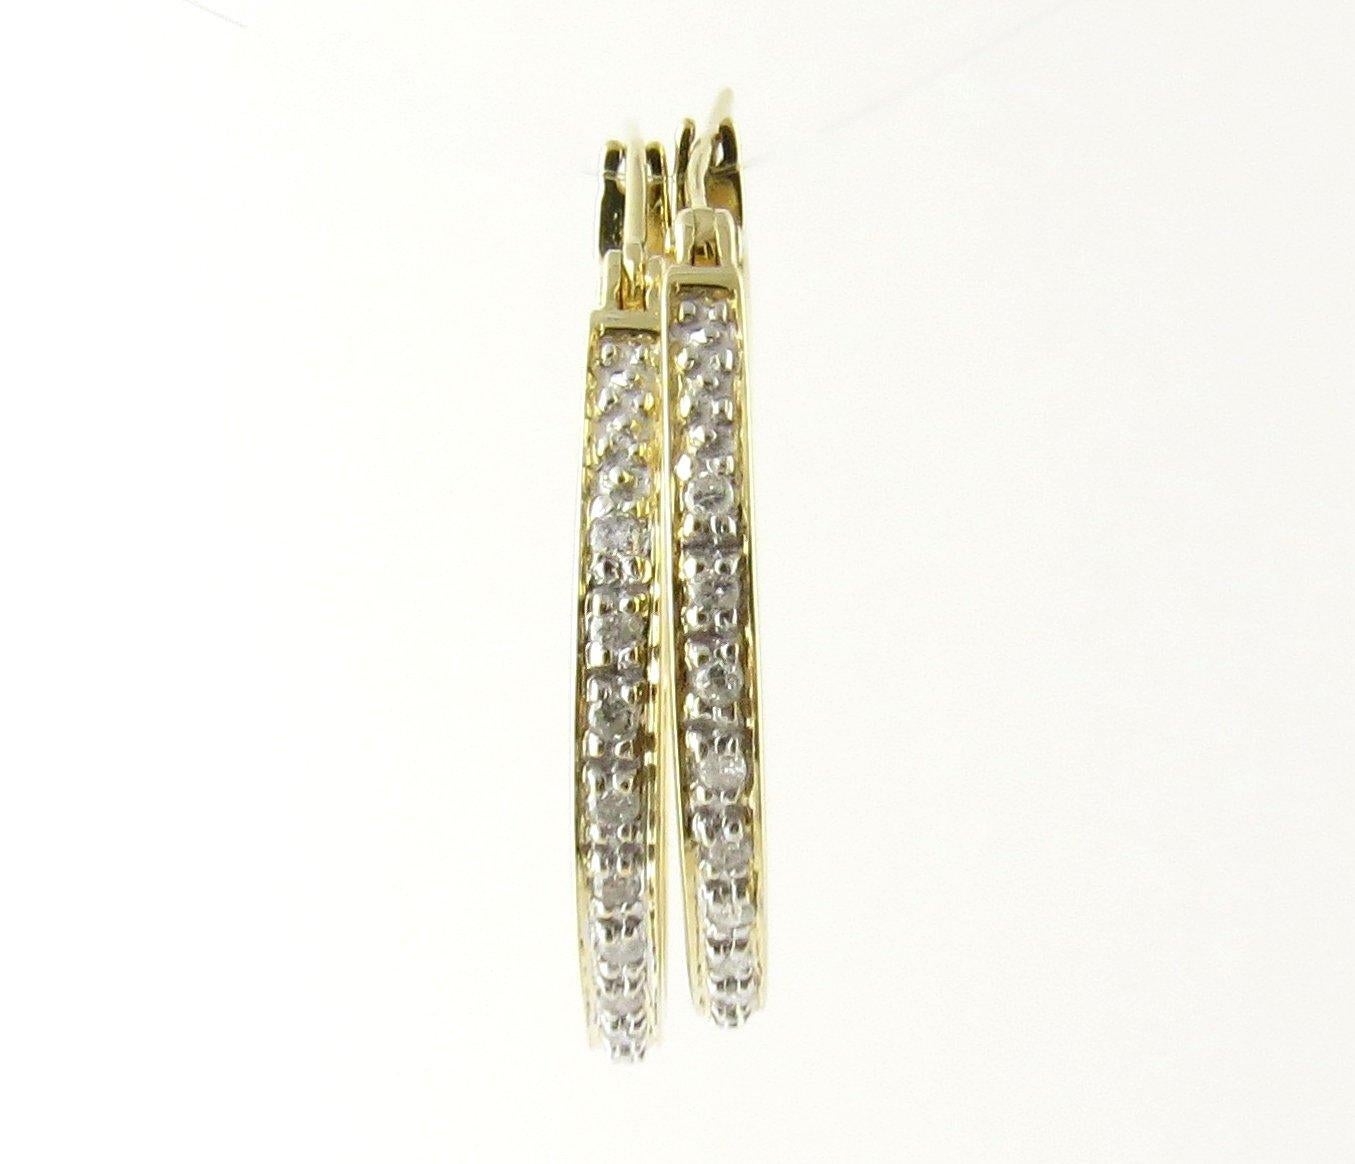 Vintage 14 Karat Yellow Gold and Diamond Hoop Earrings. These sparkling hoop earrings each feature 15 round brilliant cut diamonds set in classic 14K yellow gold.
Approximate total diamond weight: .30 ct. Diamond color: H-I Diamond clarity: SI1-SI2